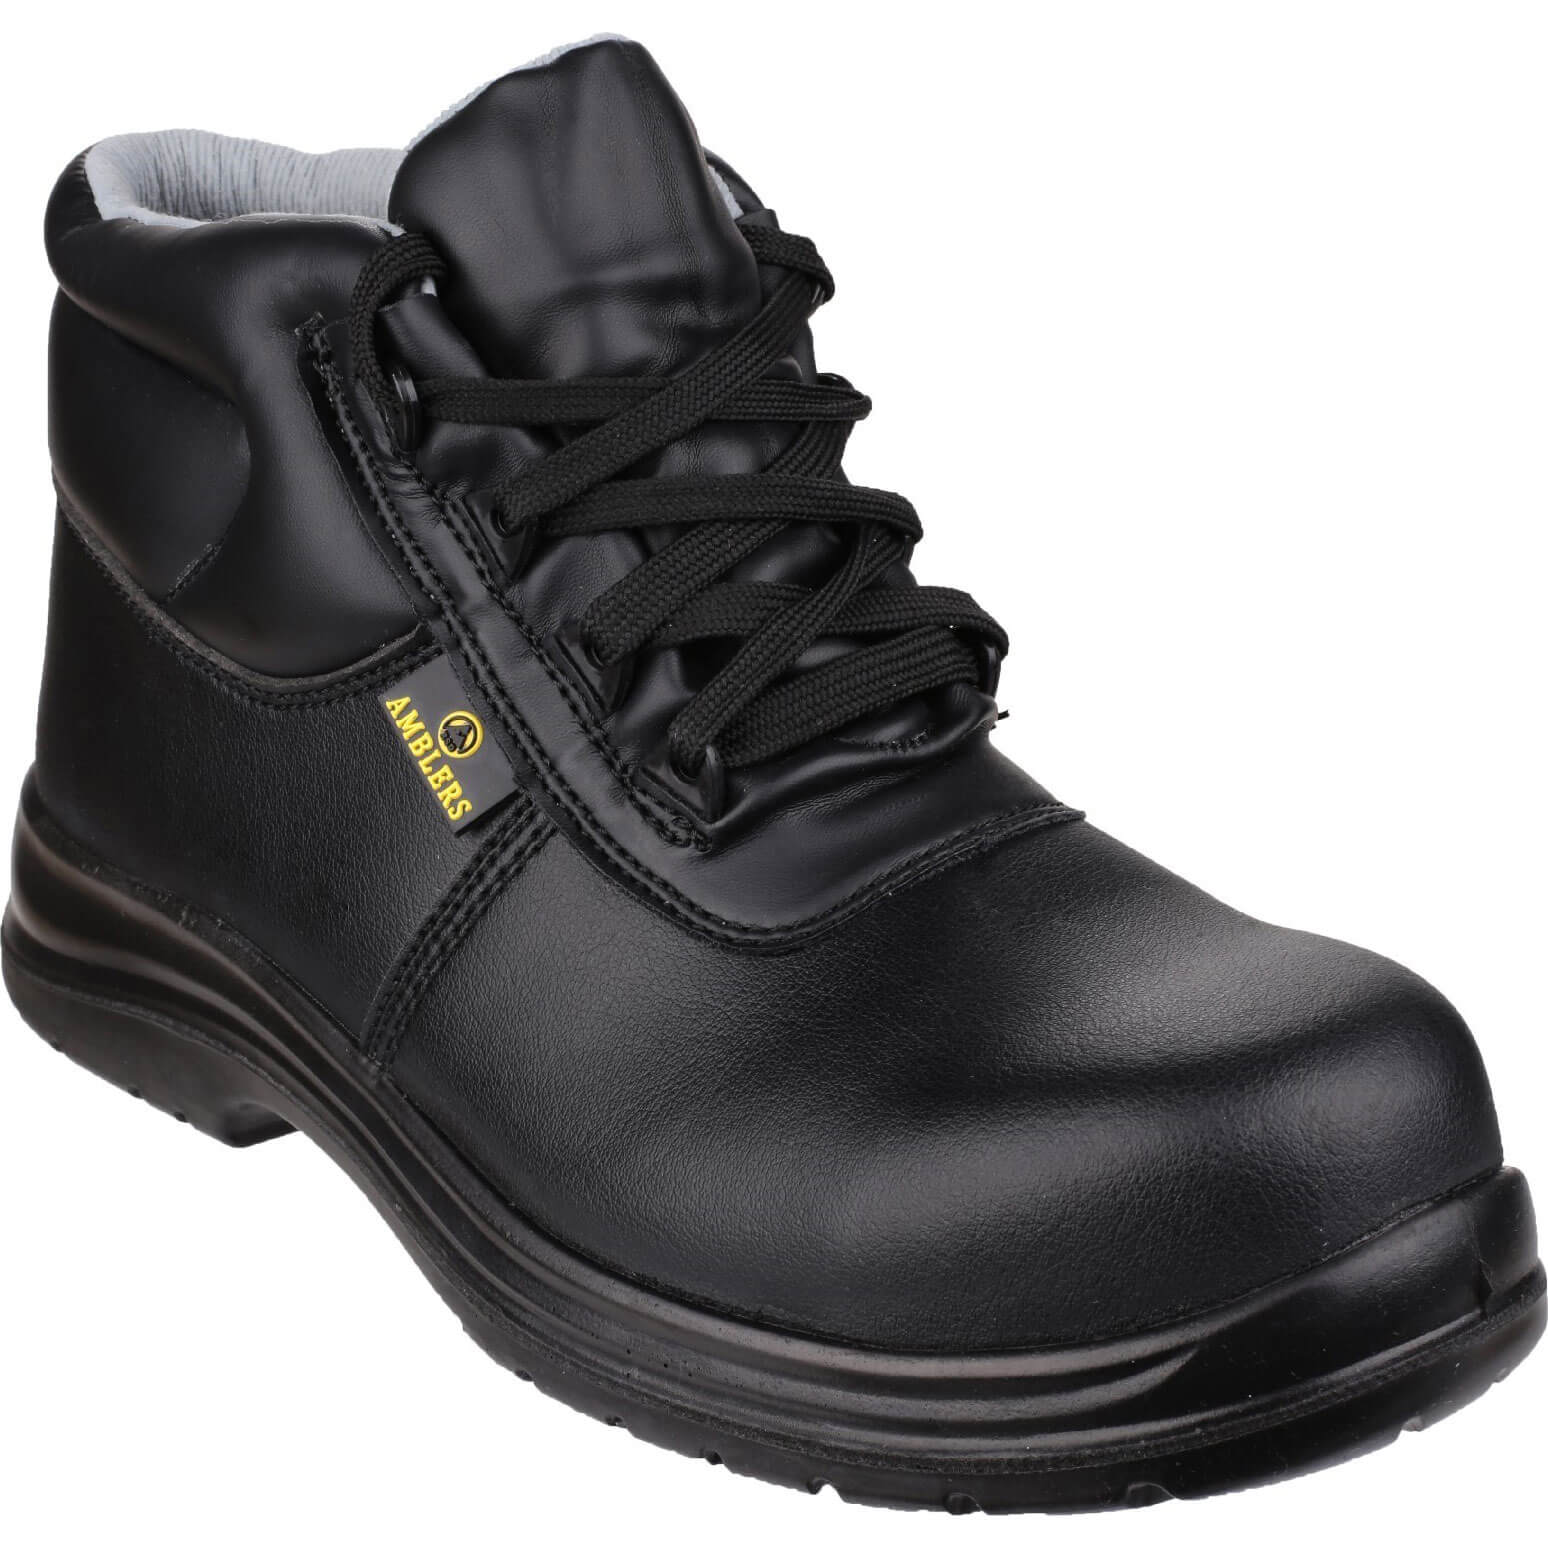 Photo of Amblers Mens Safety Fs663 Metal-free Water-resistant Safety Boots Black Size 12